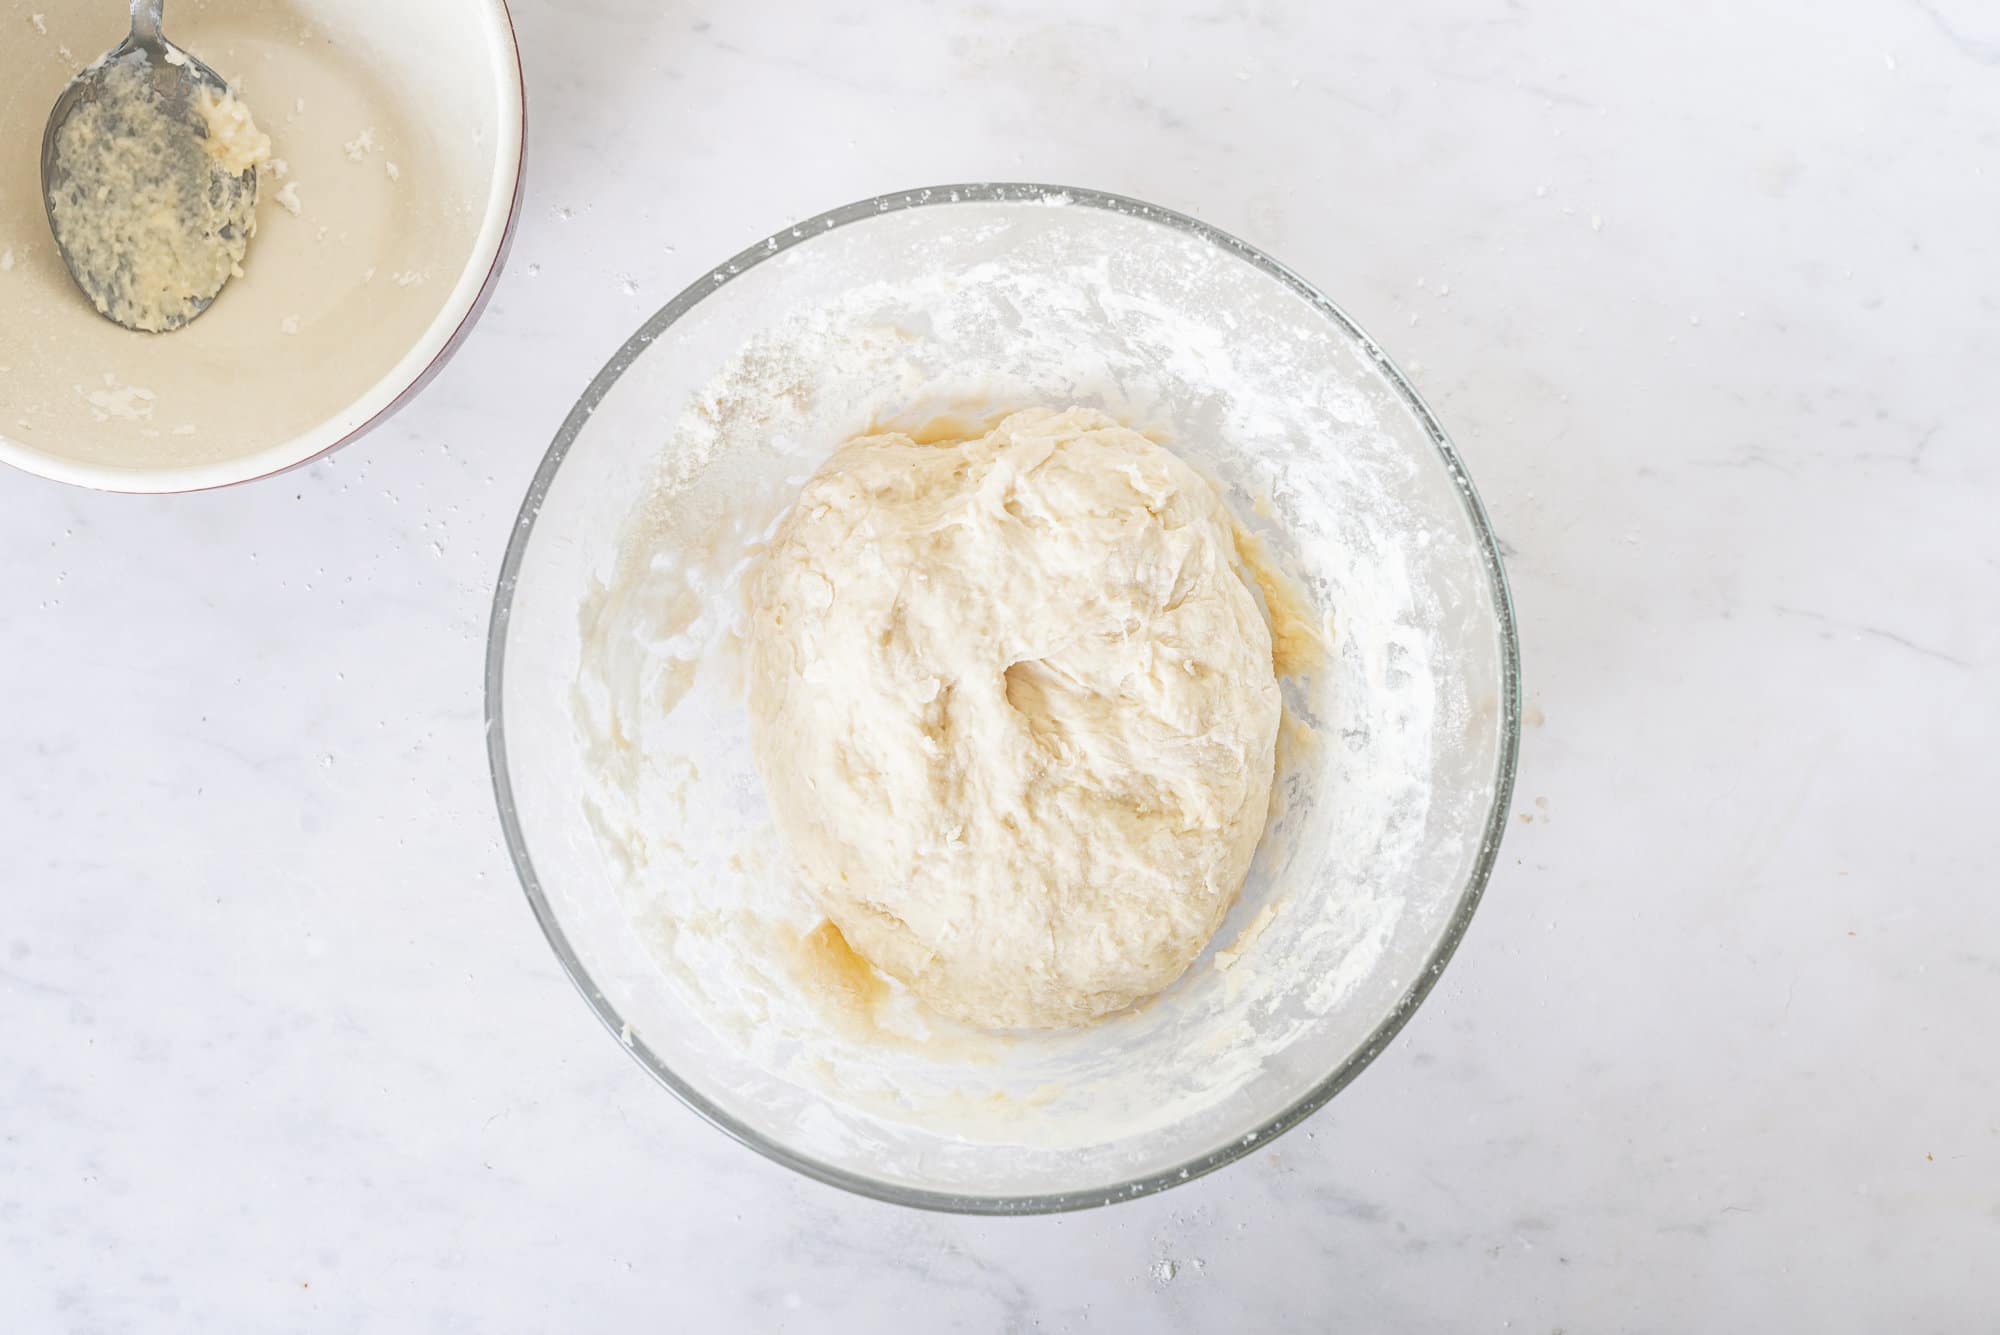 dough-in-a-glass-bowl-with-a-beige-bowl-on-the-side-with-a-spoon-in-it